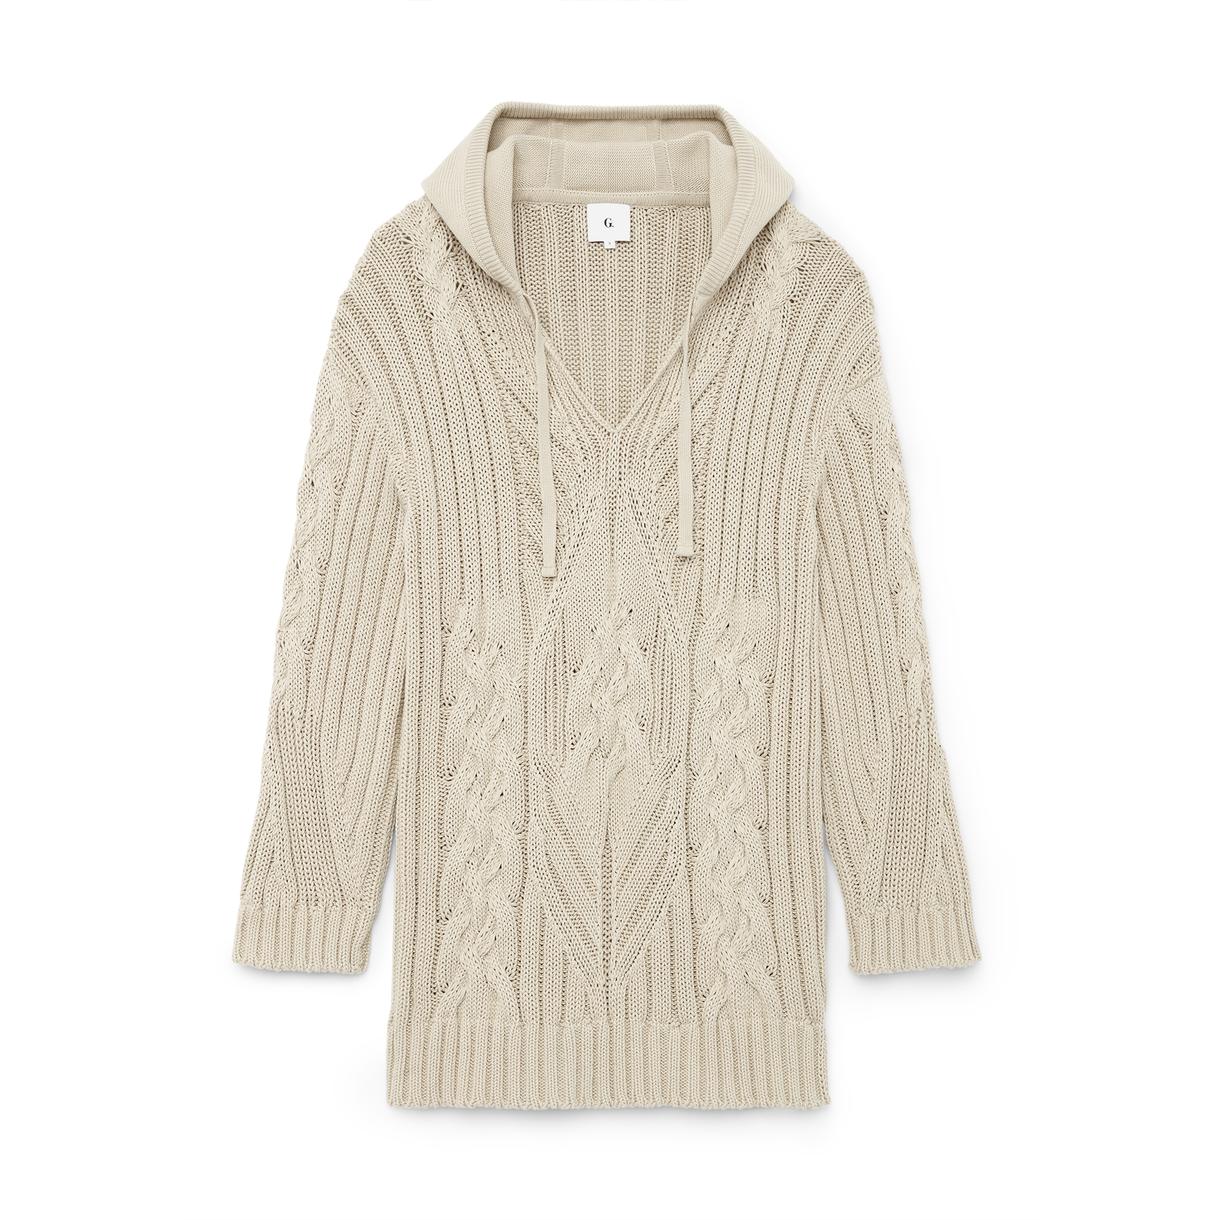 G. Label by goop Silberg Cable Surf Sweater | goop